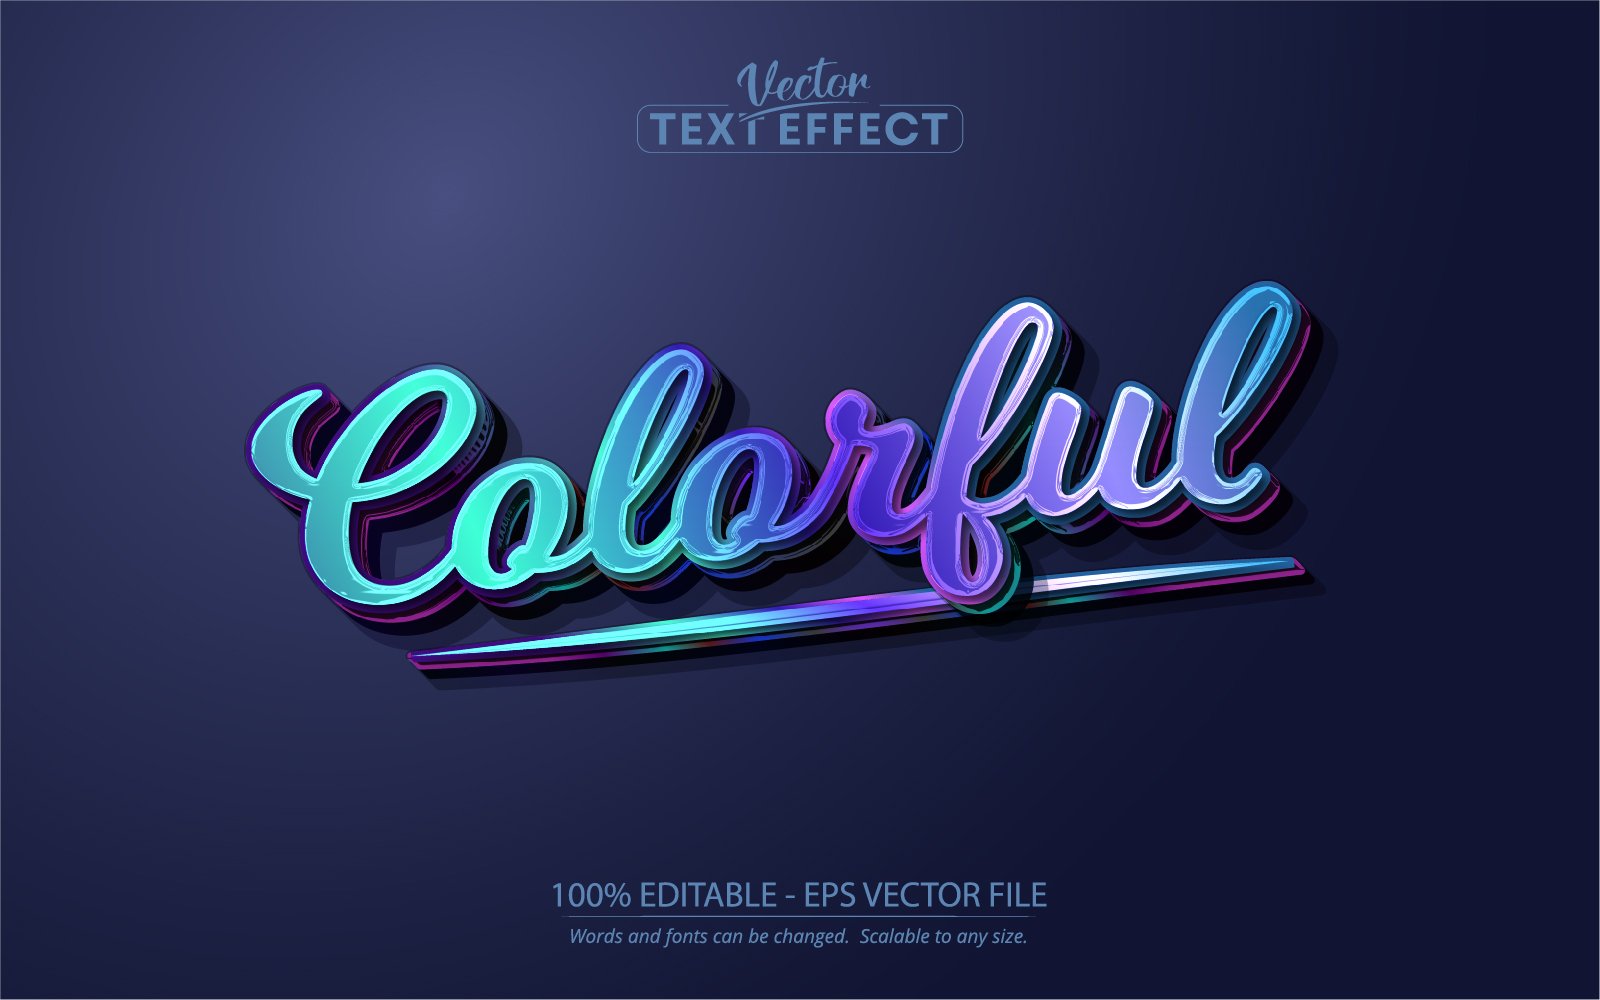 Colorful - Editable Text Effect, Comic And Gradient Cartoon Text Style, Graphics Illustration